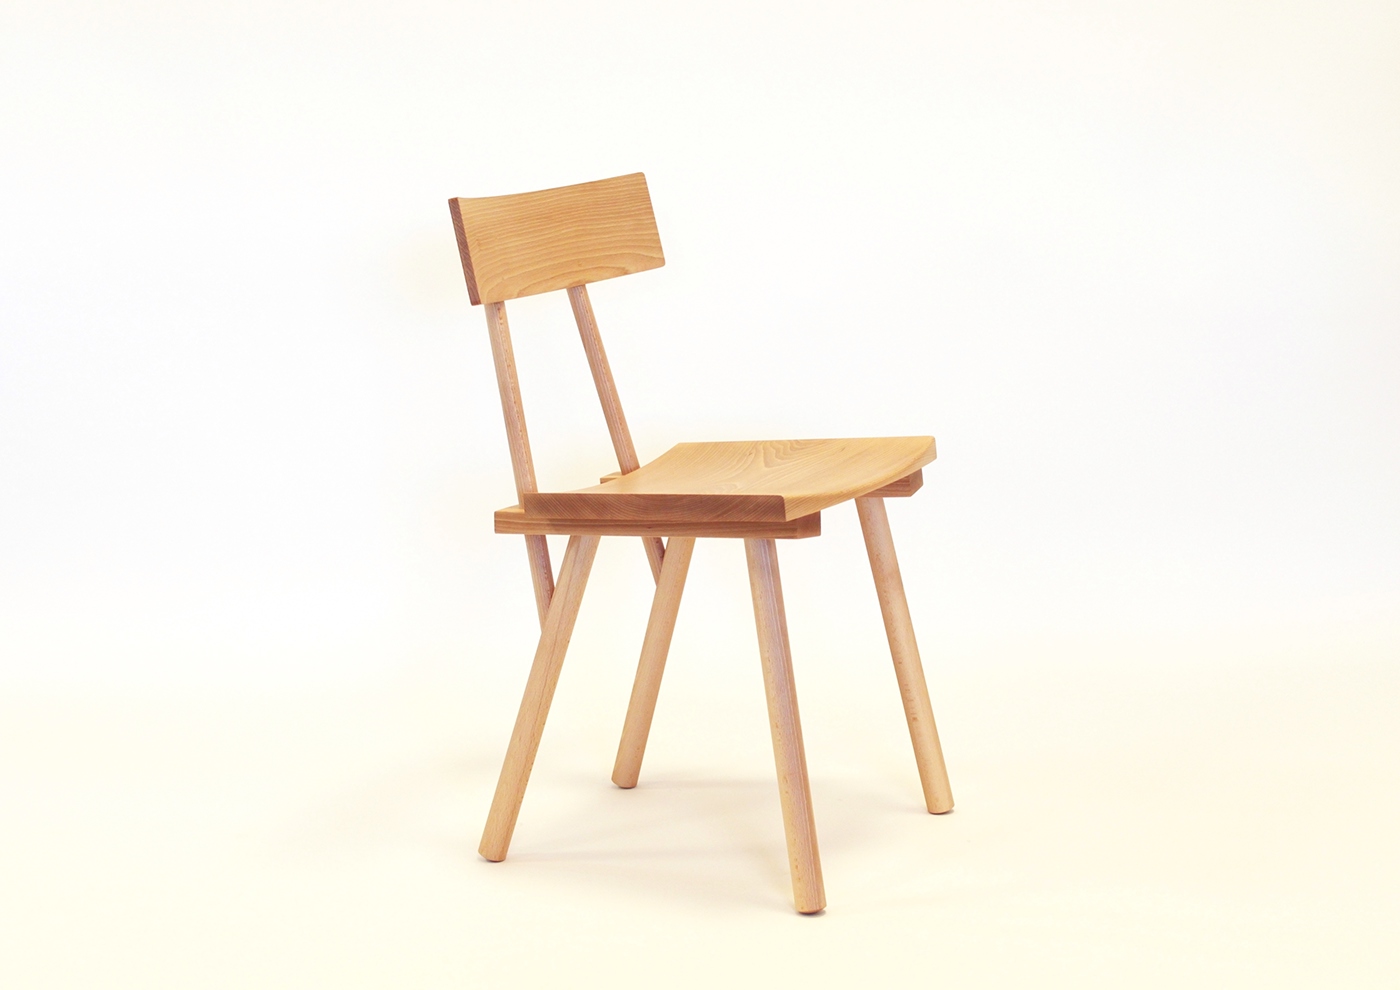 woodworking furniture design Beech chair chairmaking